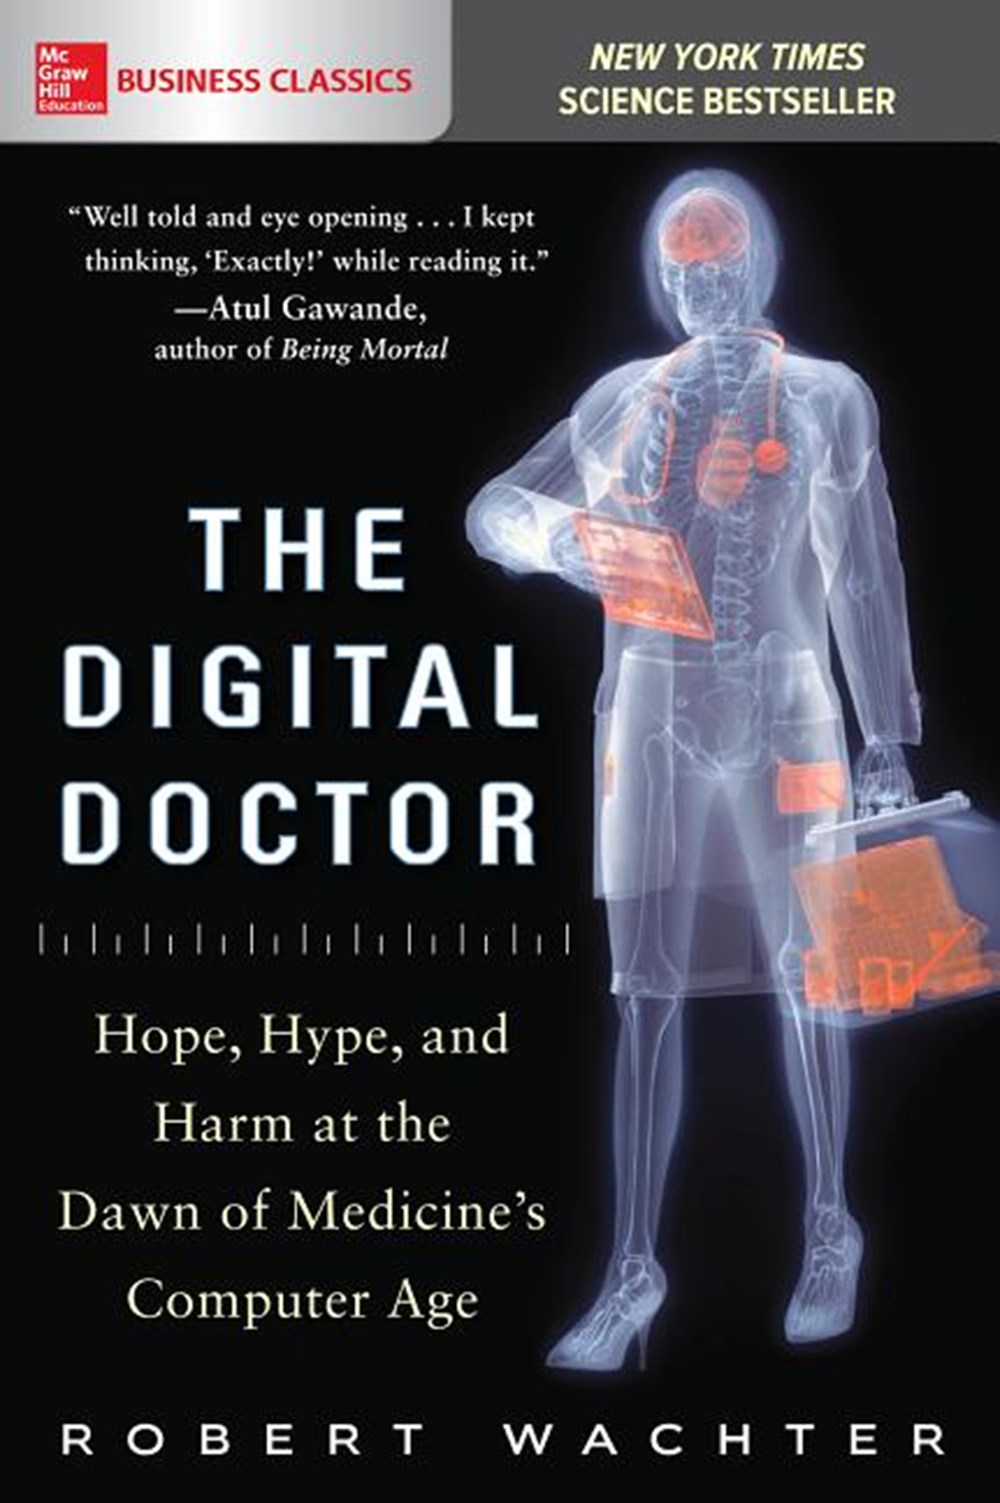 Digital Doctor: Hope, Hype, and Harm at the Dawn of Medicine's Computer Age